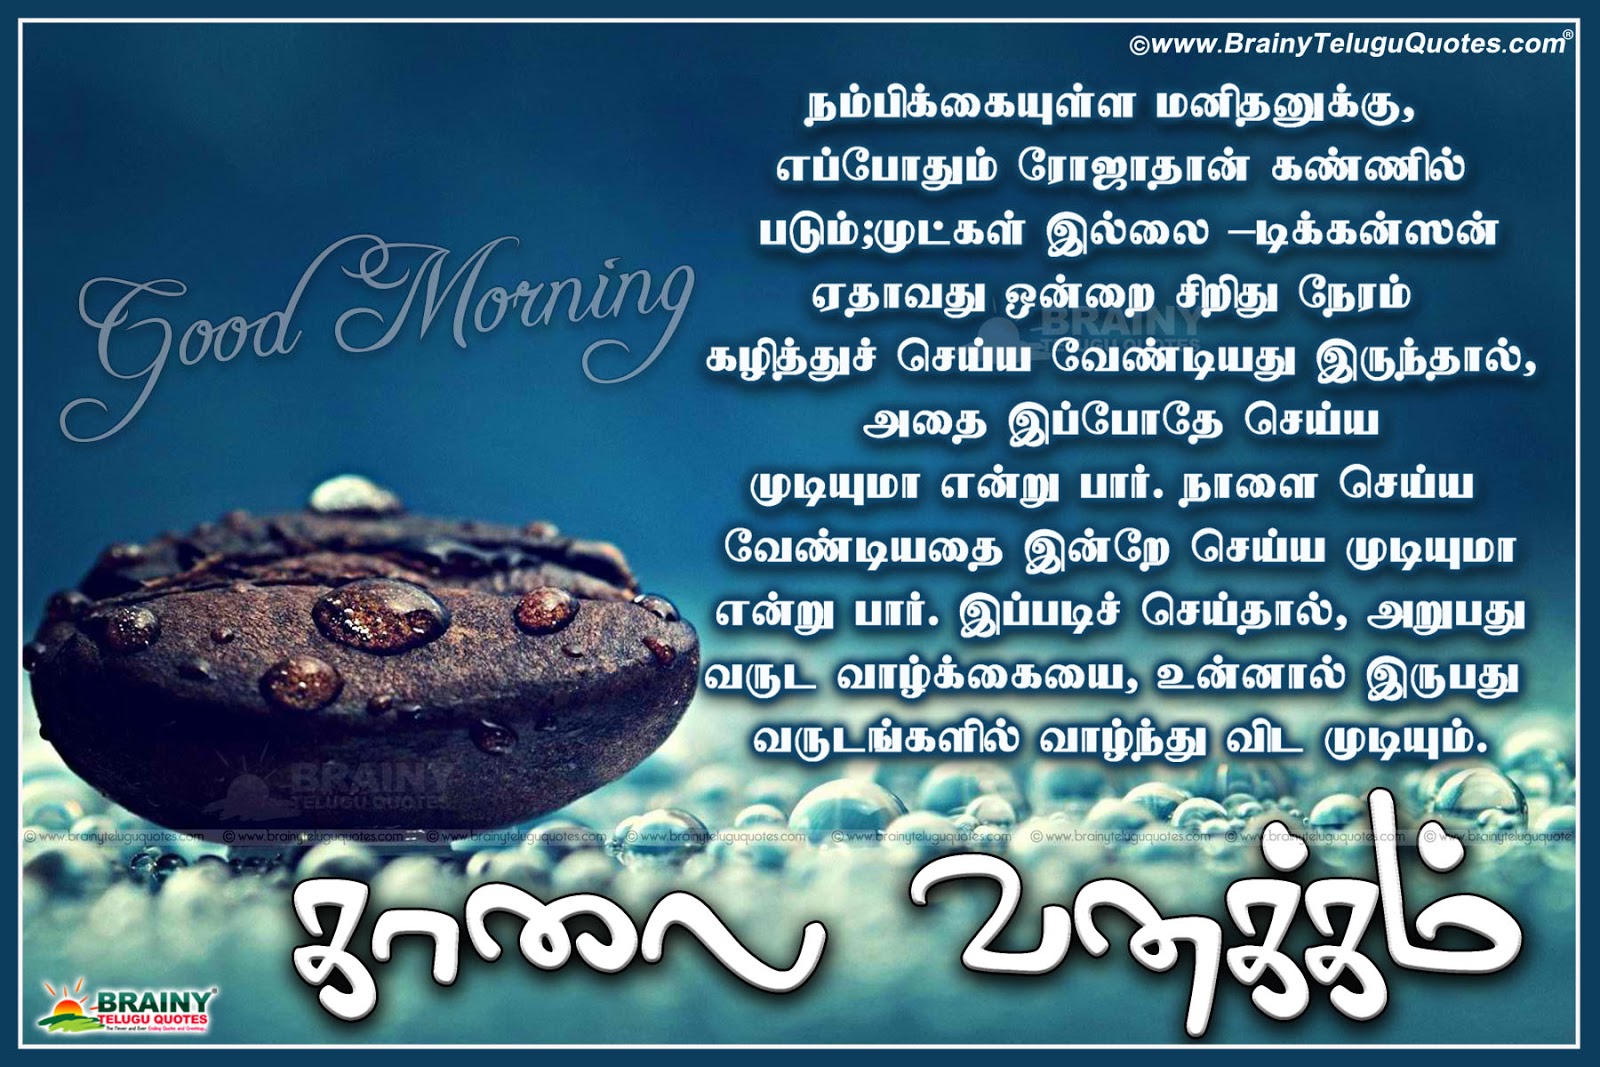 Tamil good morning greetings with inspiring quotations